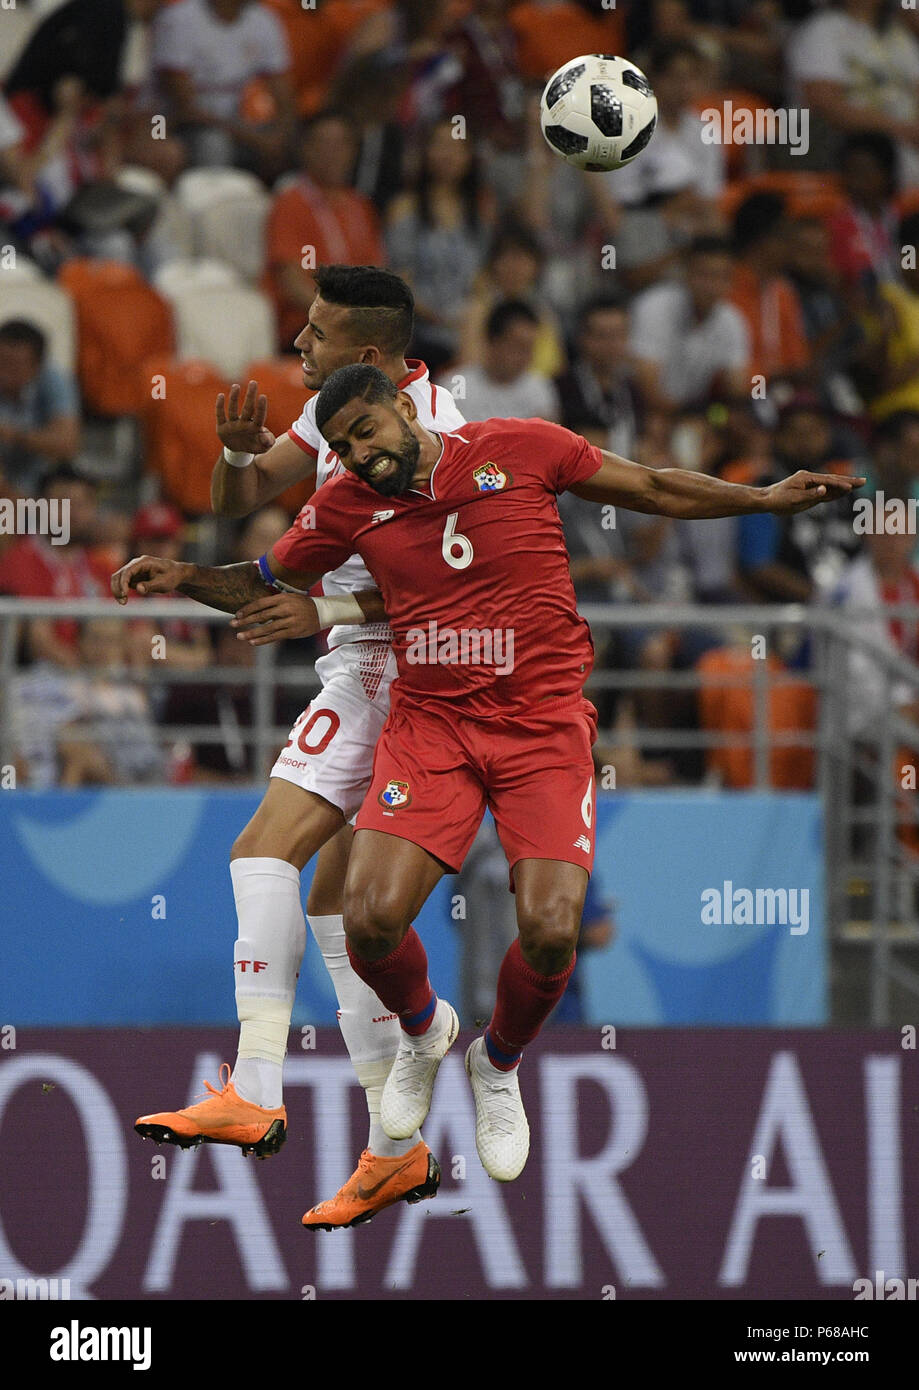 Saransk, Russia. 28th June, 2018. Gabriel Gomez (front) of Panama competes for a header during the 2018 FIFA World Cup Group G match between Panama and Tunisia in Saransk, Russia, June 28, 2018. Credit: Lui Siu Wai/Xinhua/Alamy Live News Stock Photo